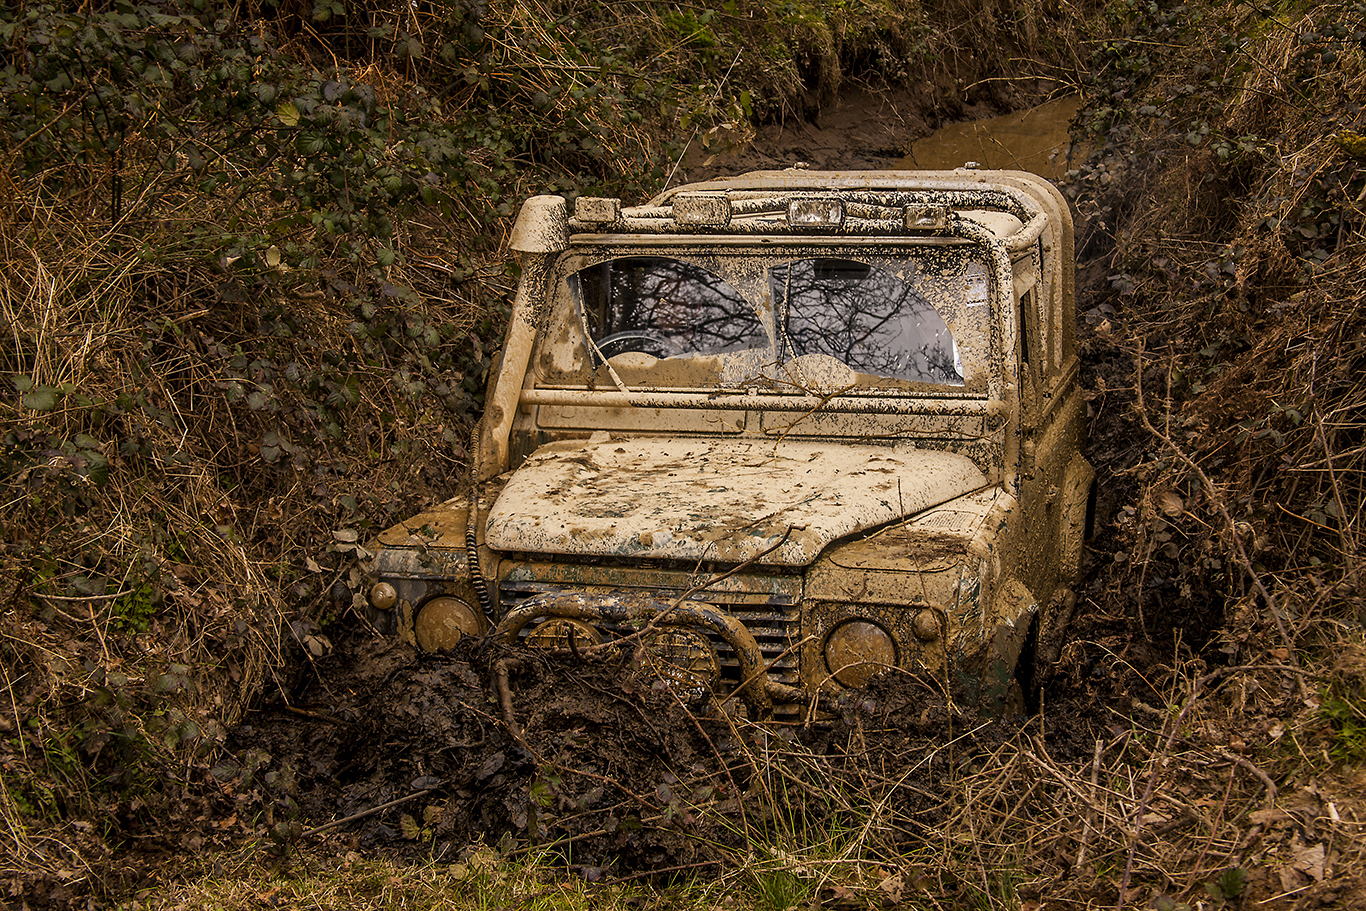 off-road photographs (10 of 116)